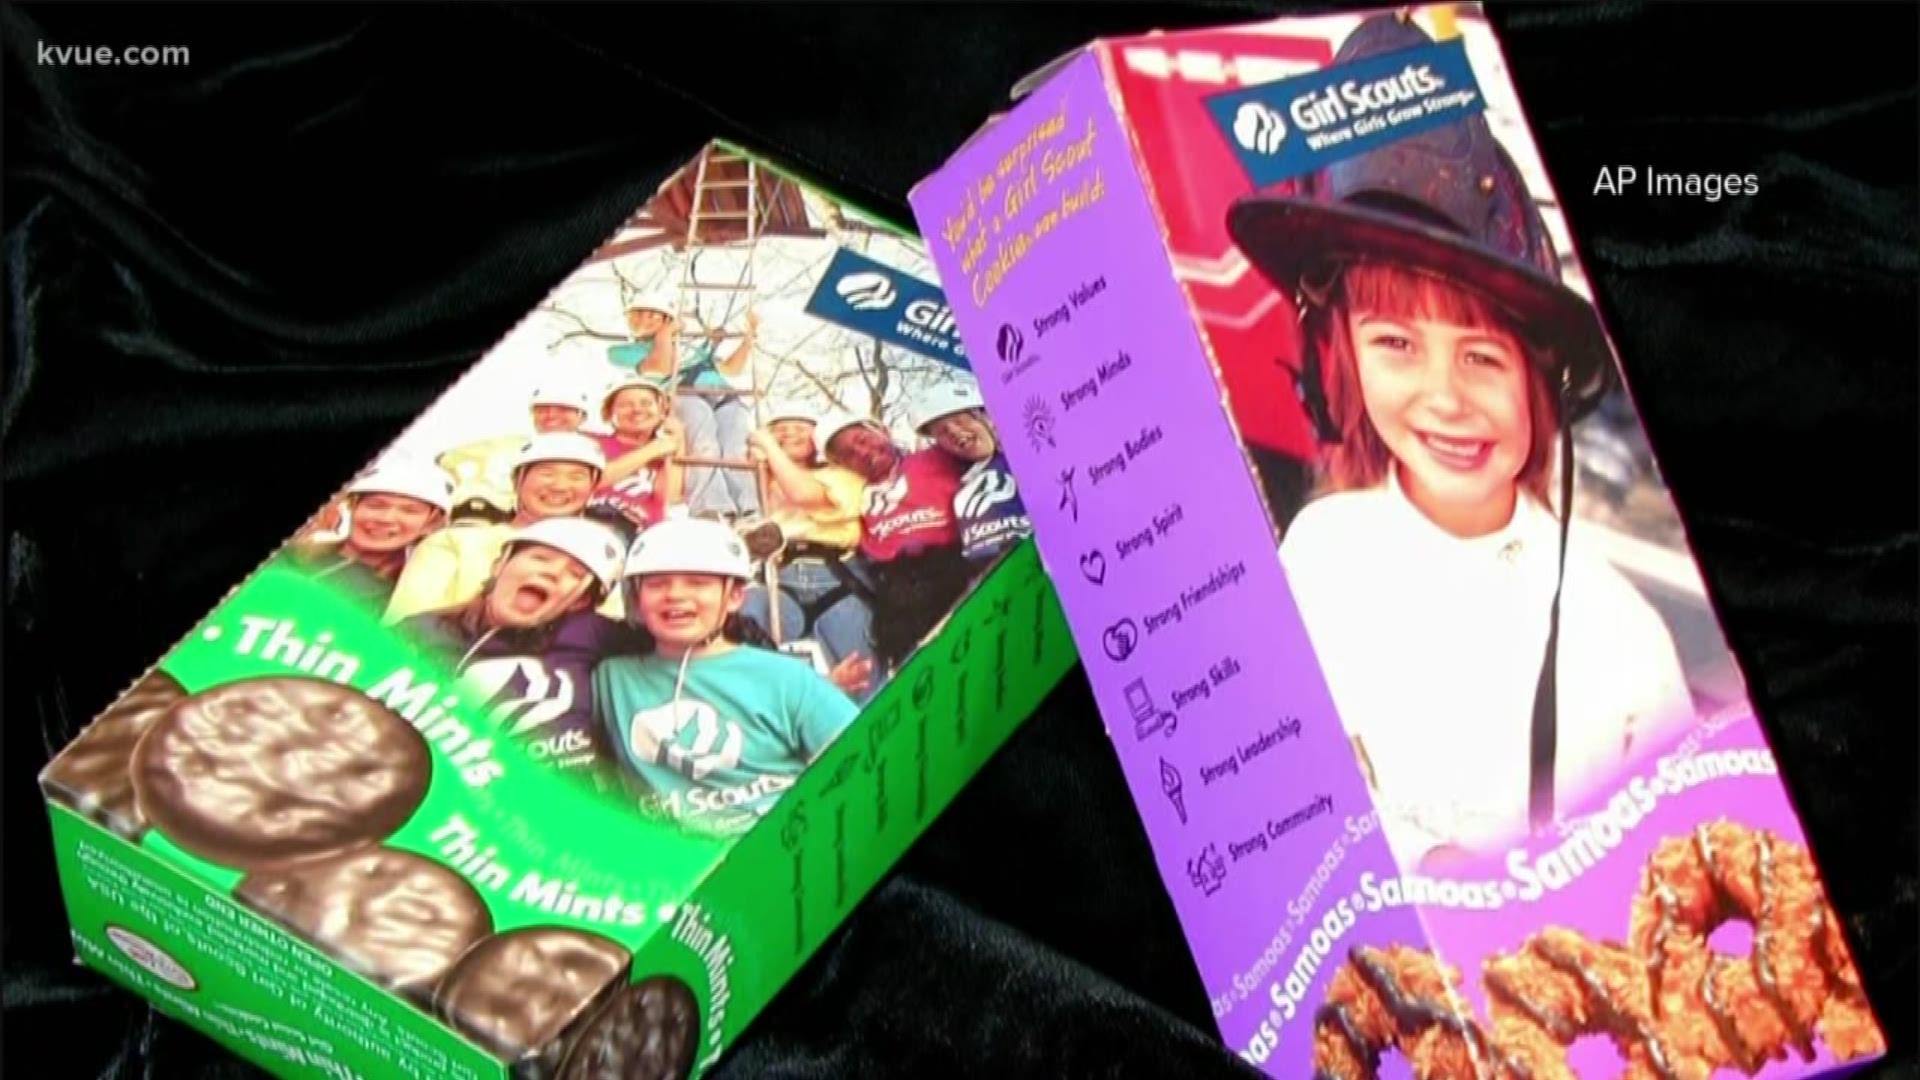 Don't worry, there's no shortage of Girl Scout Cookies.